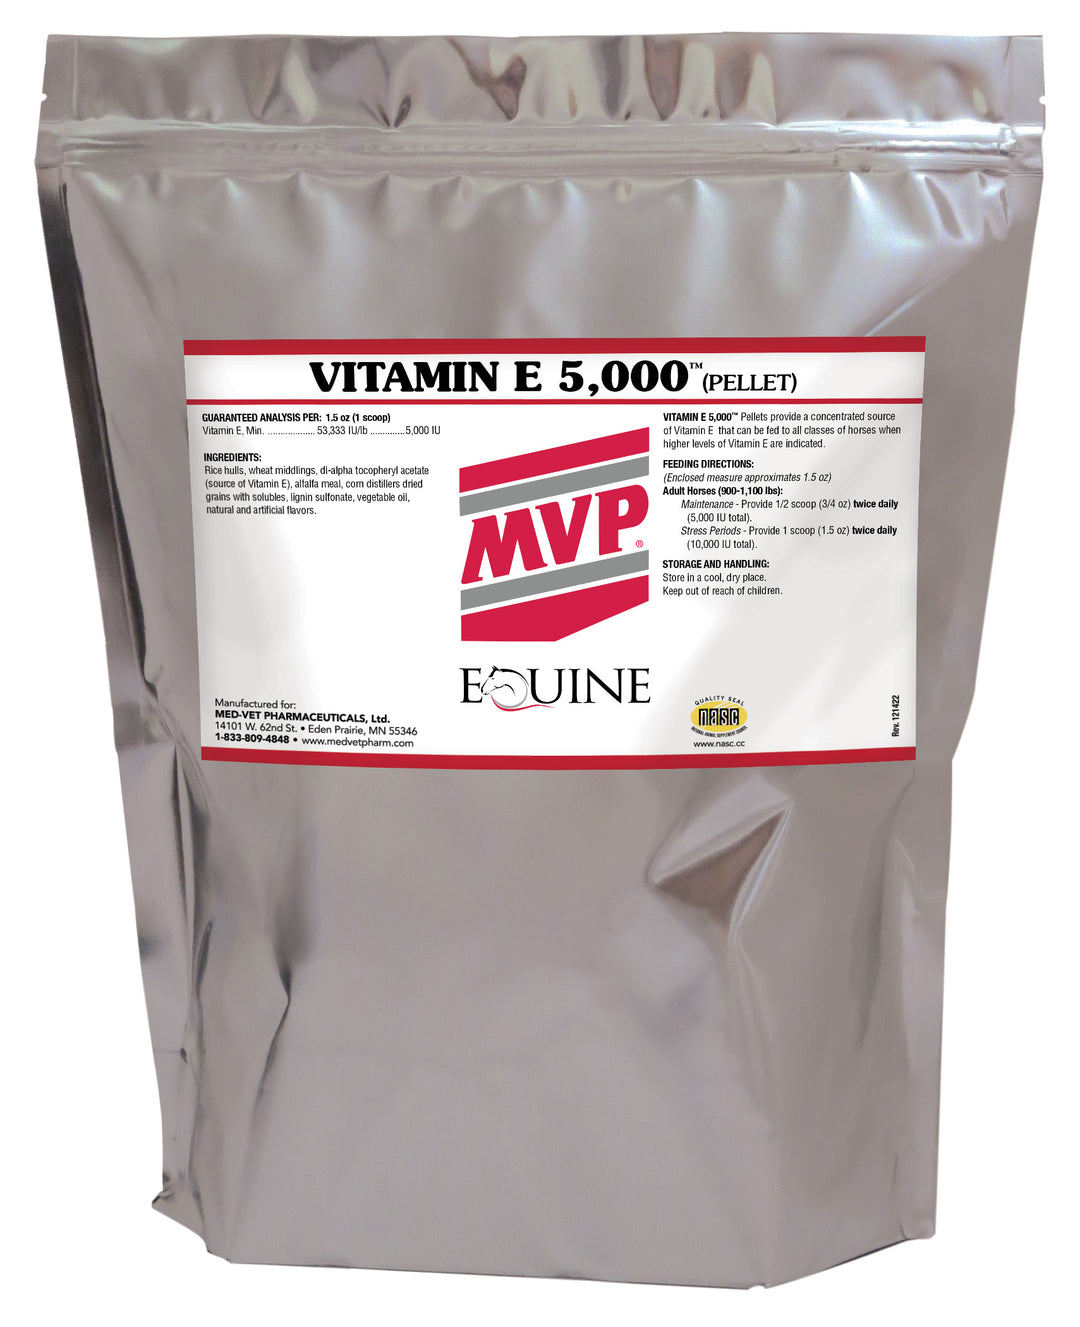 MED-VET Vitamin E 5,000 (Pellets) - MVP Horse Supplement (7.5 lbs, 15 lbs, pellet). Concentrated Vitamin E, Essential Antioxidant Support for Horse Health